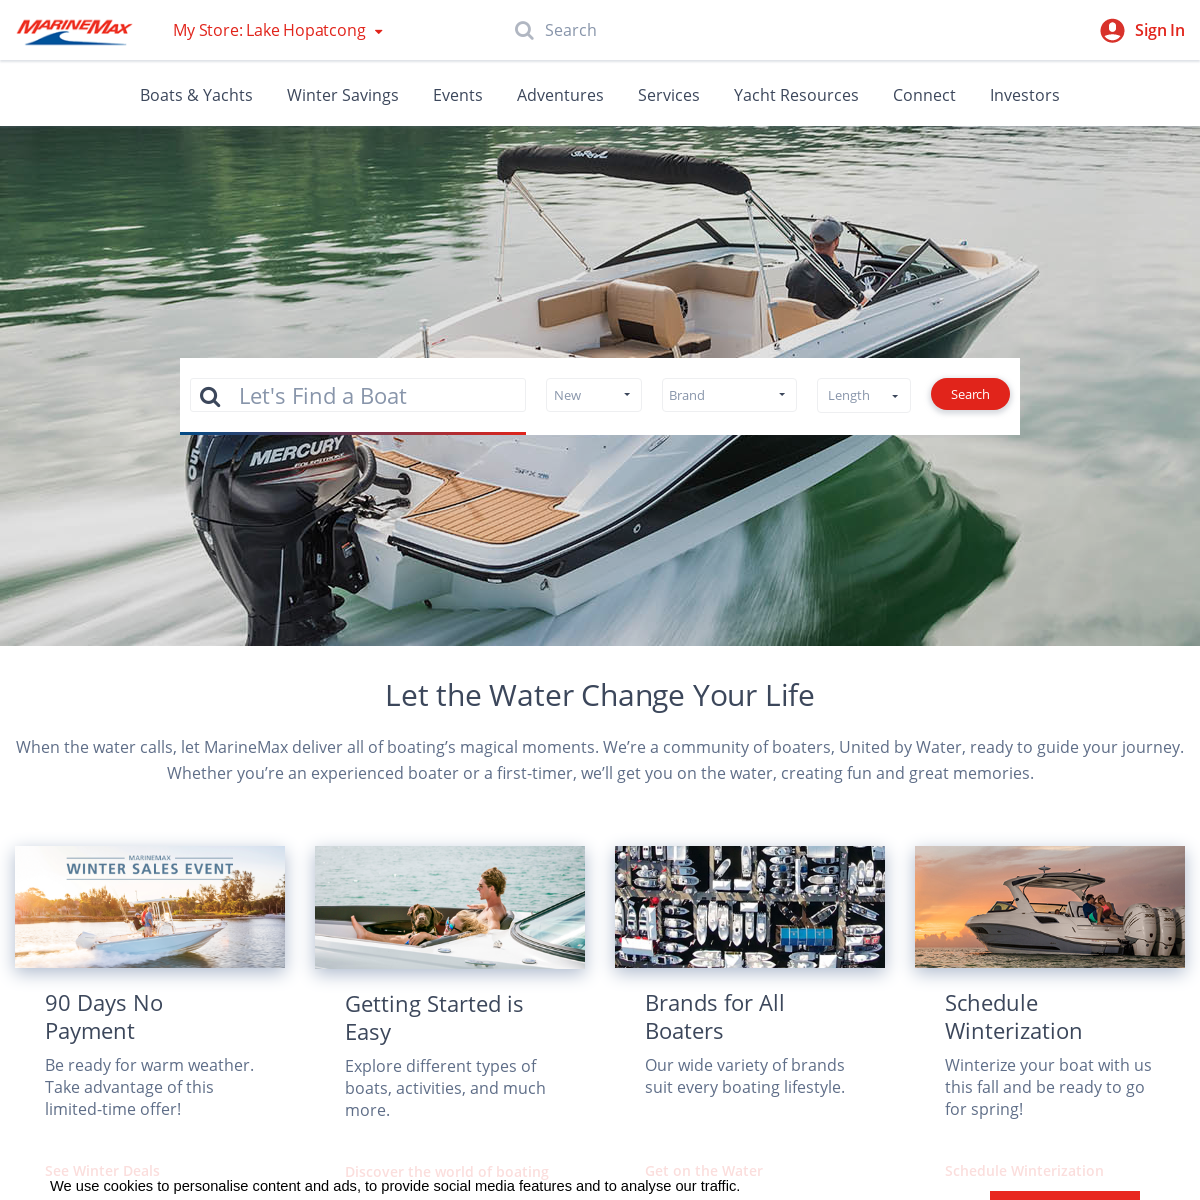 A complete backup of marinemax.com